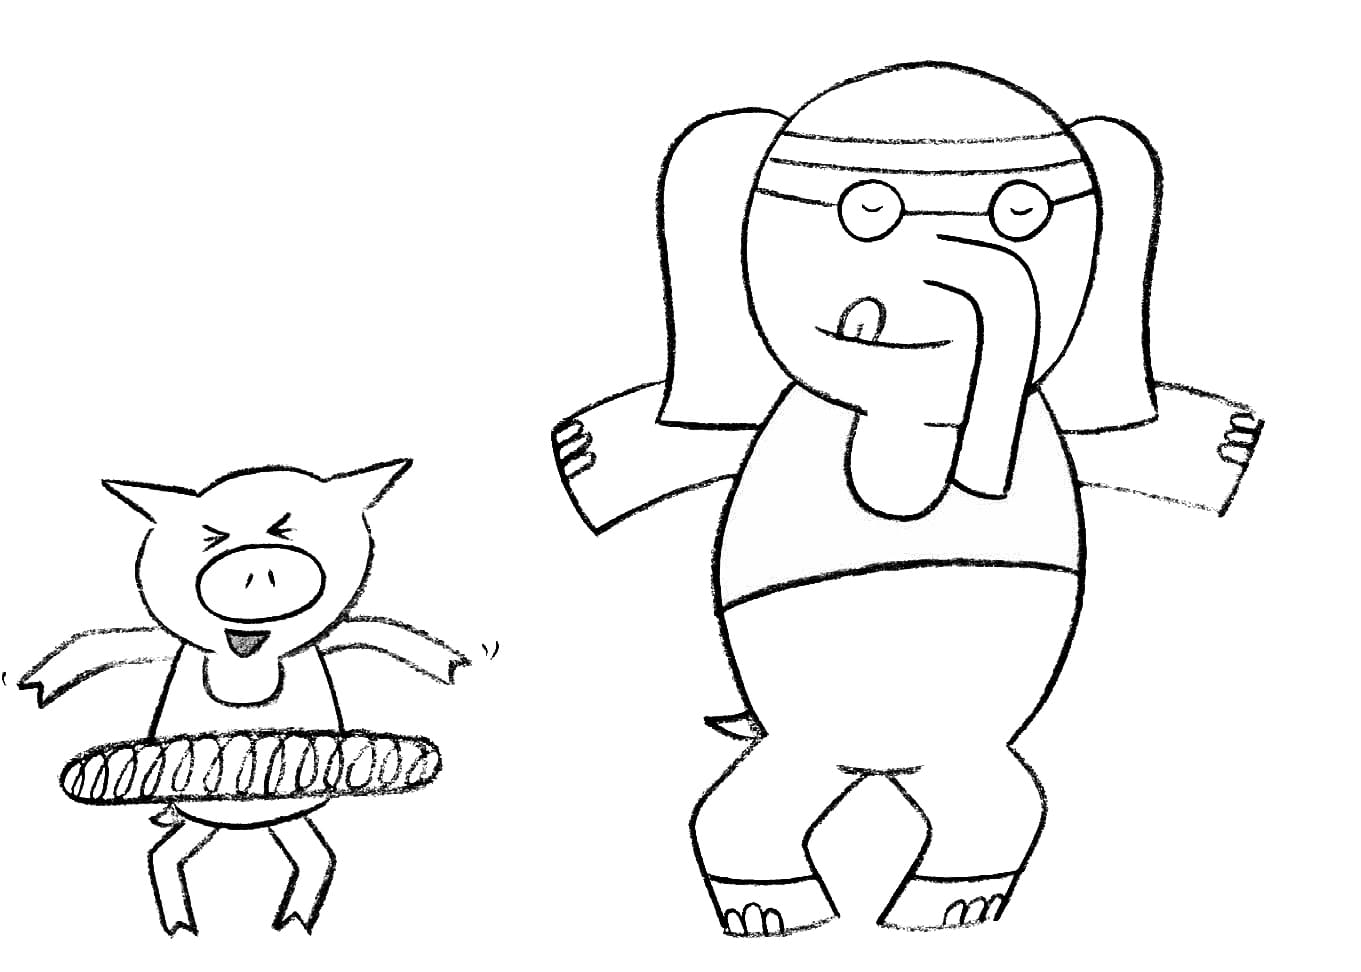 Funny elephant and piggie coloring page